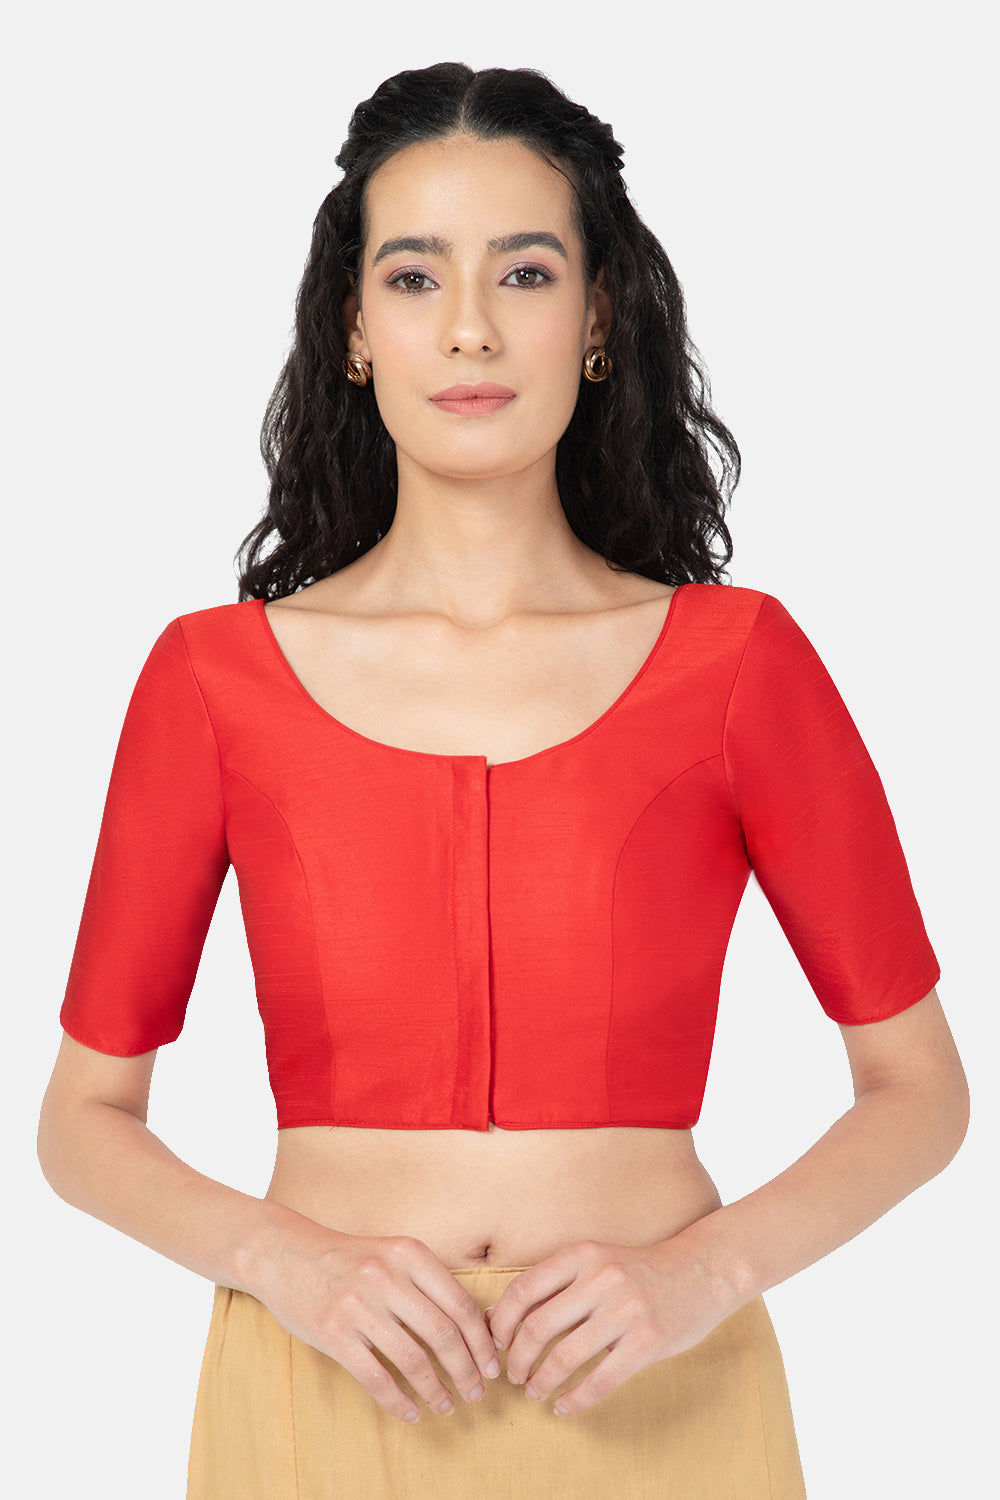 Readymade Blouses, Stitched Blouses, Buy Stitched Blouses Online